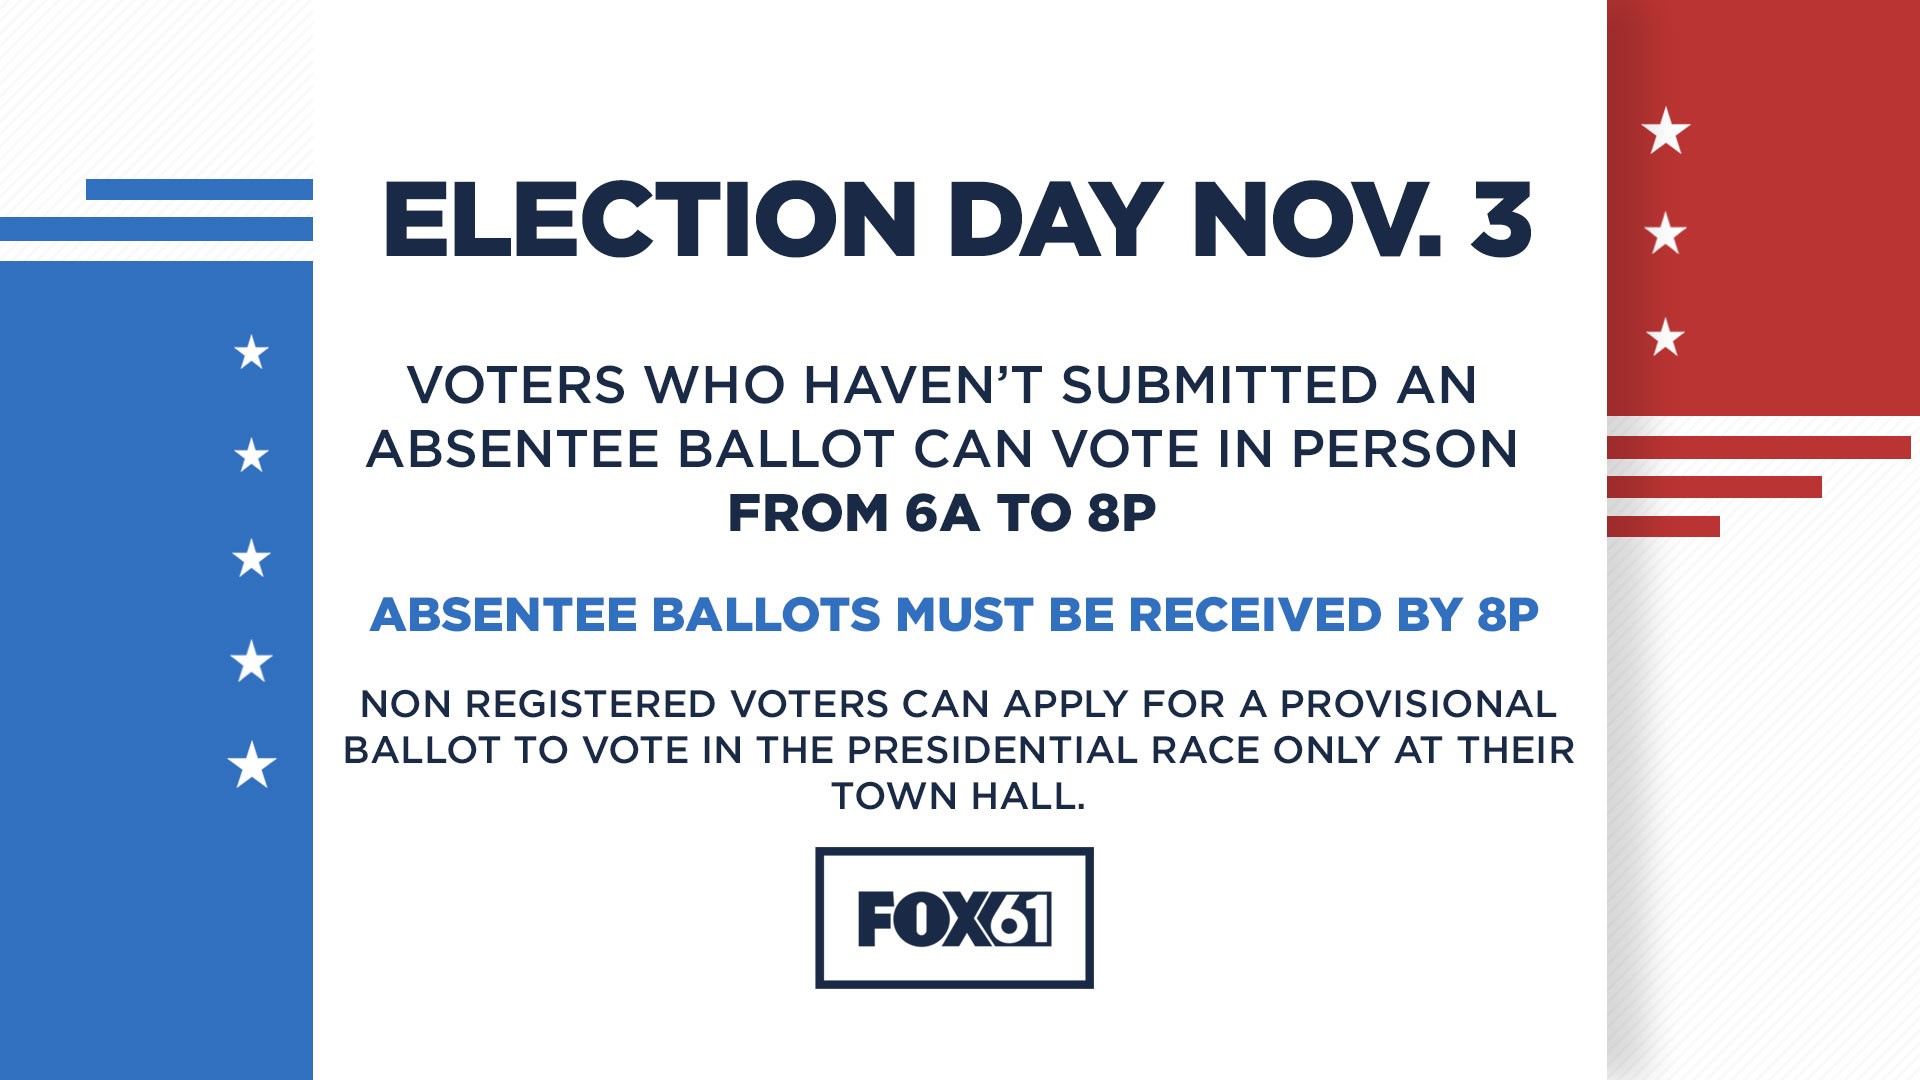 Information on voting on Election Day in Connecticut